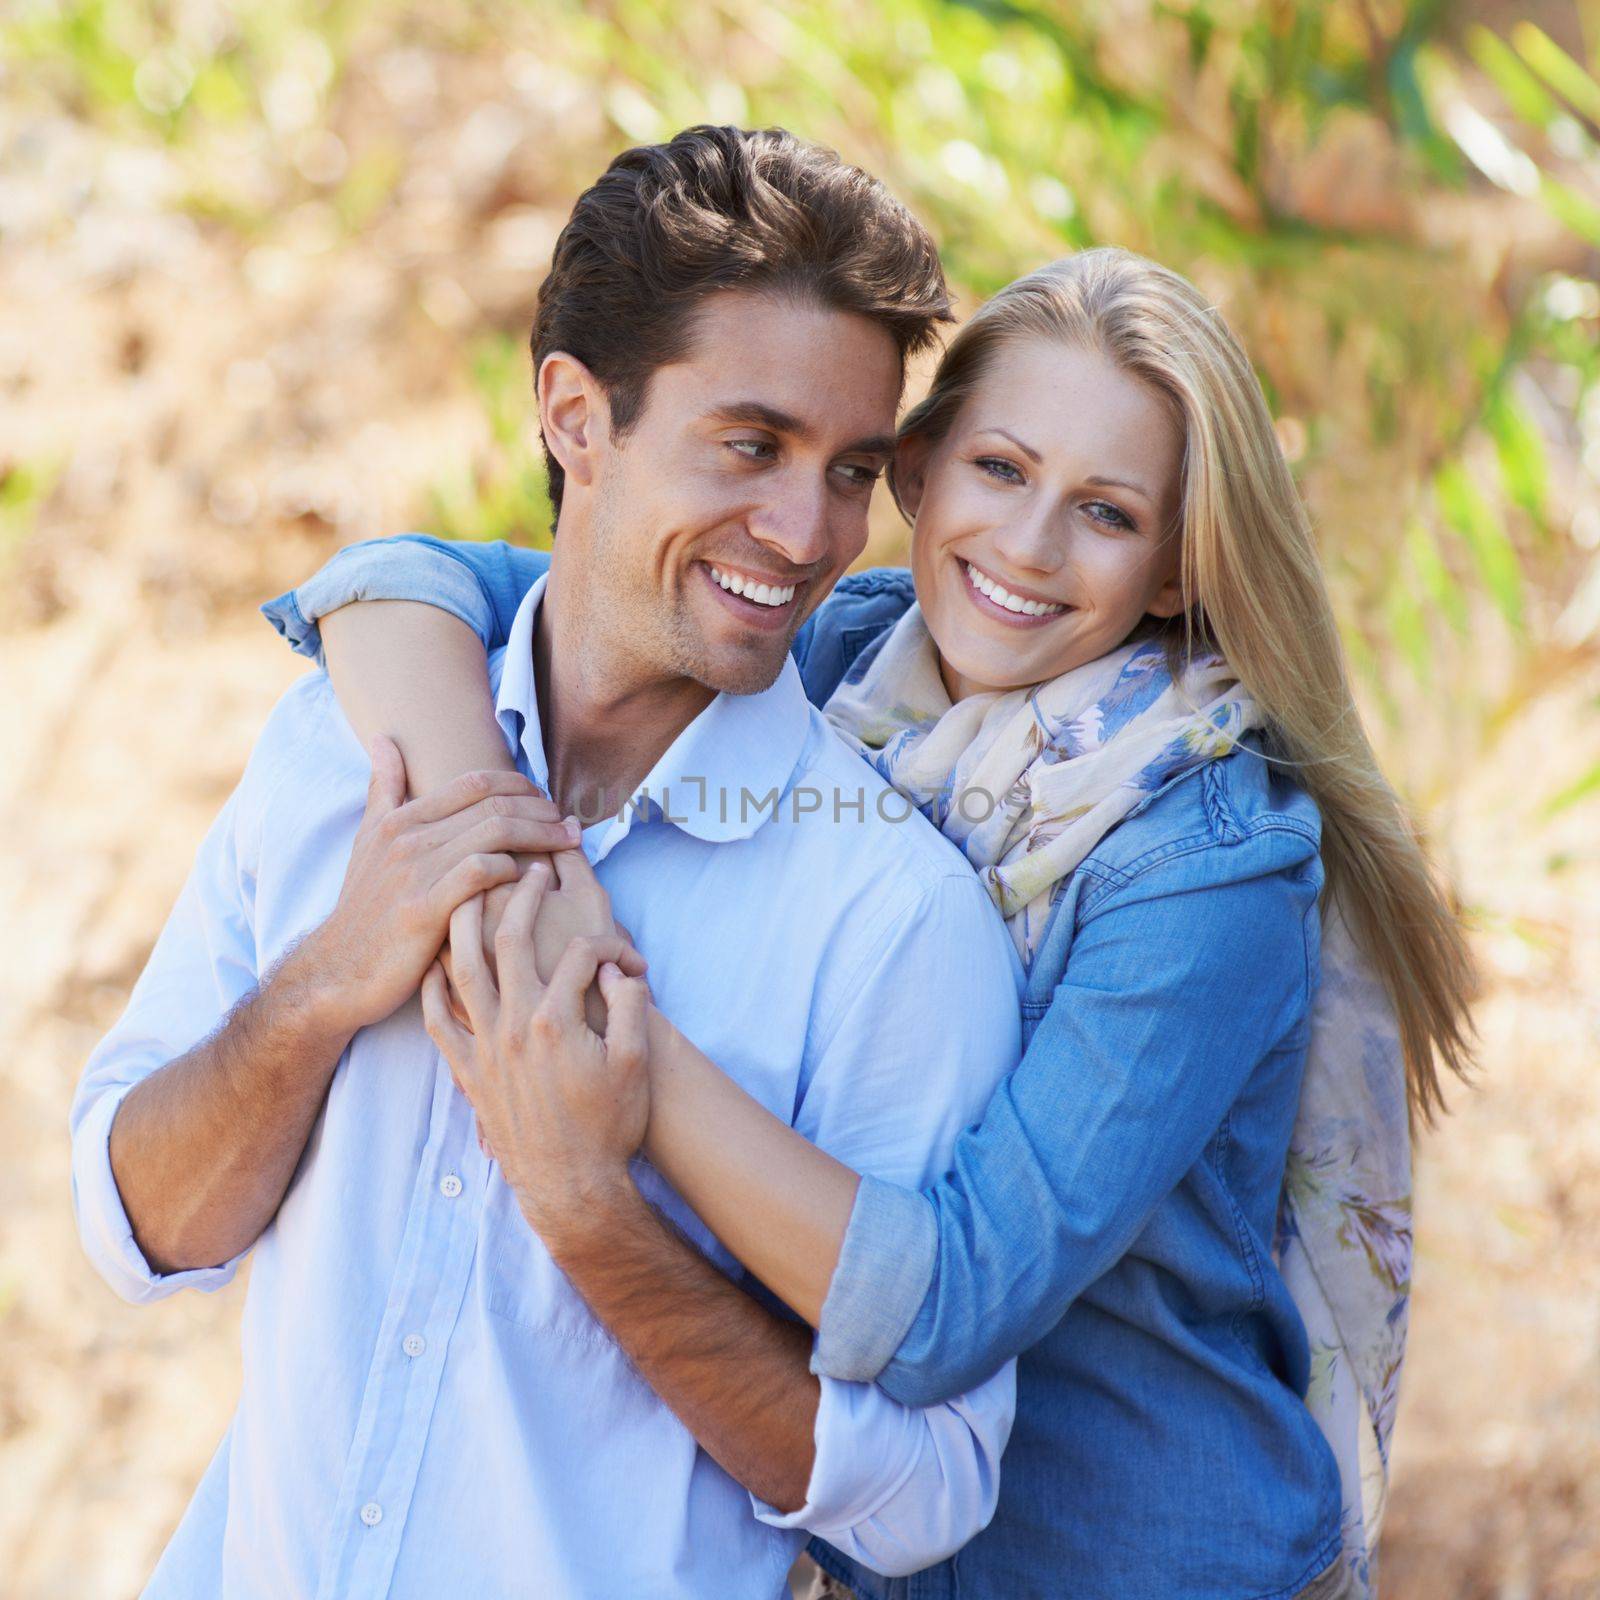 Loving every moment together. A cropped view of a romantic young couple standing together outdoors